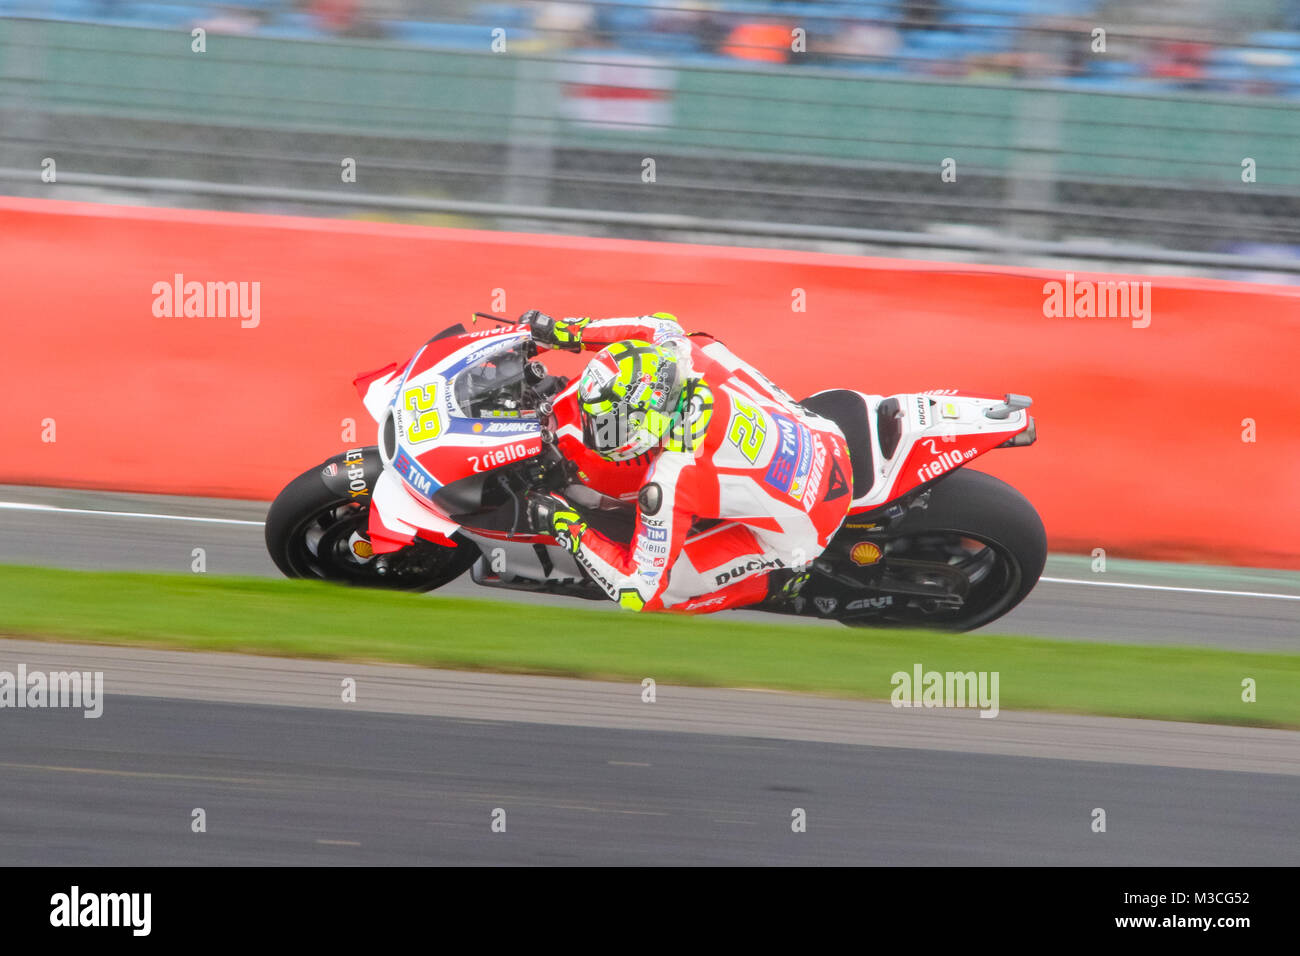 Andrea Iannone on his way to setting a quick time in the qualifying session  at the MotoGP British Grand Prix 2016 Stock Photo